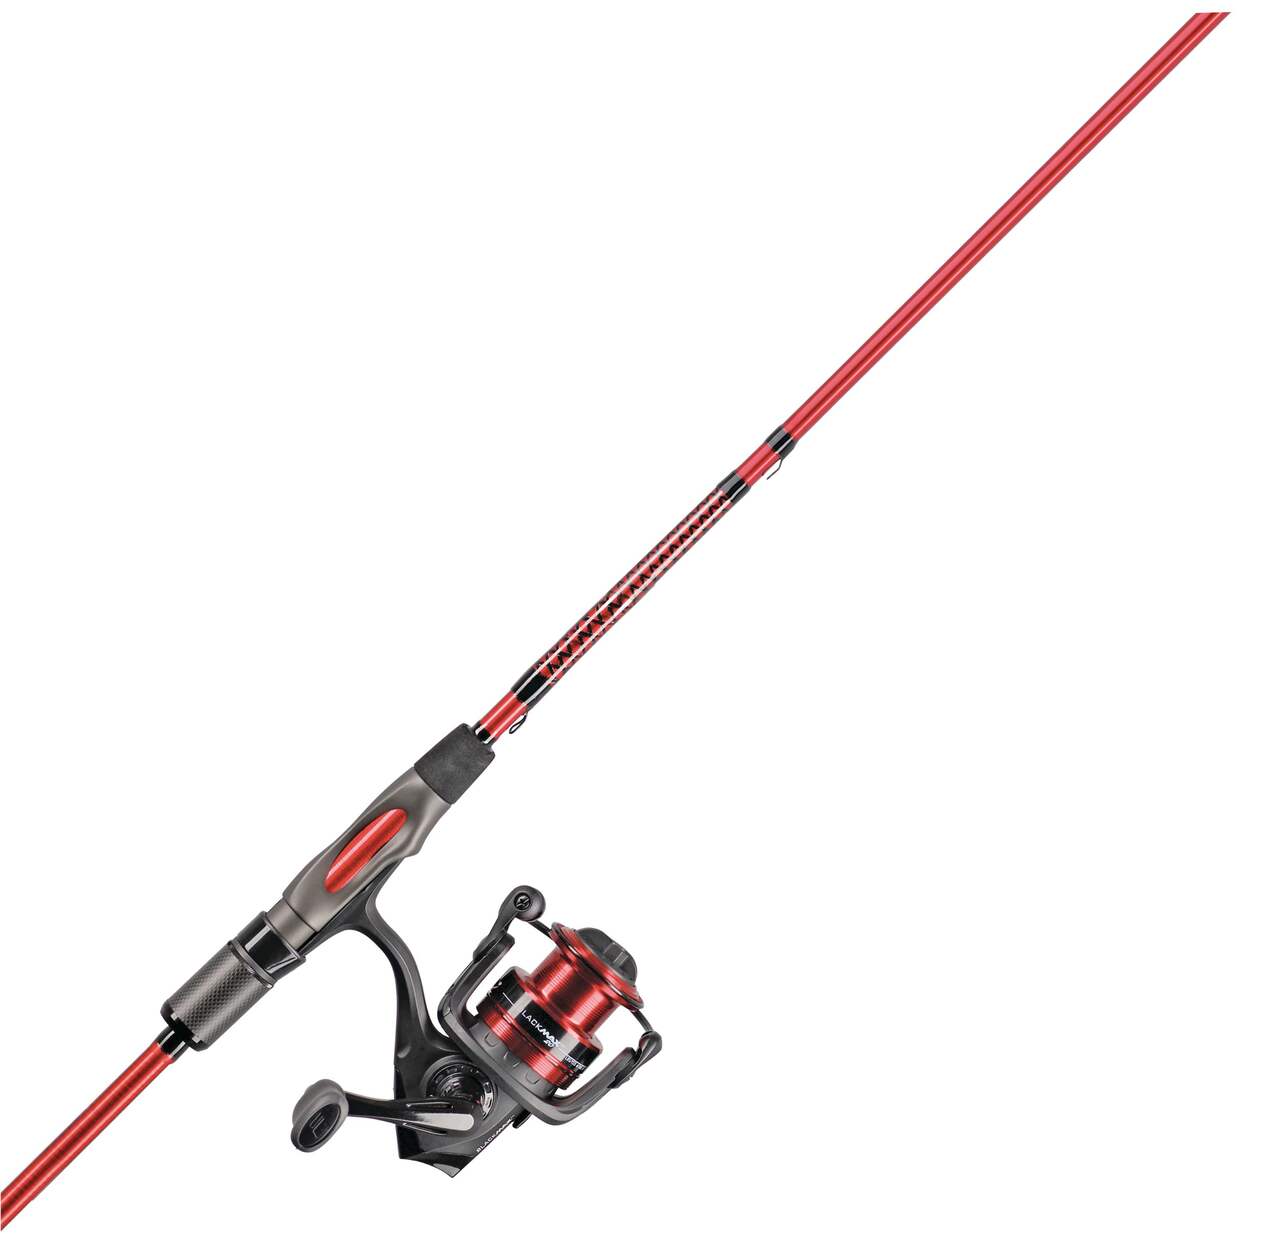 https://media-www.canadiantire.ca/product/playing/fishing/fishing-equipment/1784935/ugly-stik-carbon-spinning-combo-6-6-medium-141b797f-8ffe-488f-b113-3986e65dfb90-jpgrendition.jpg?imdensity=1&imwidth=1244&impolicy=mZoom